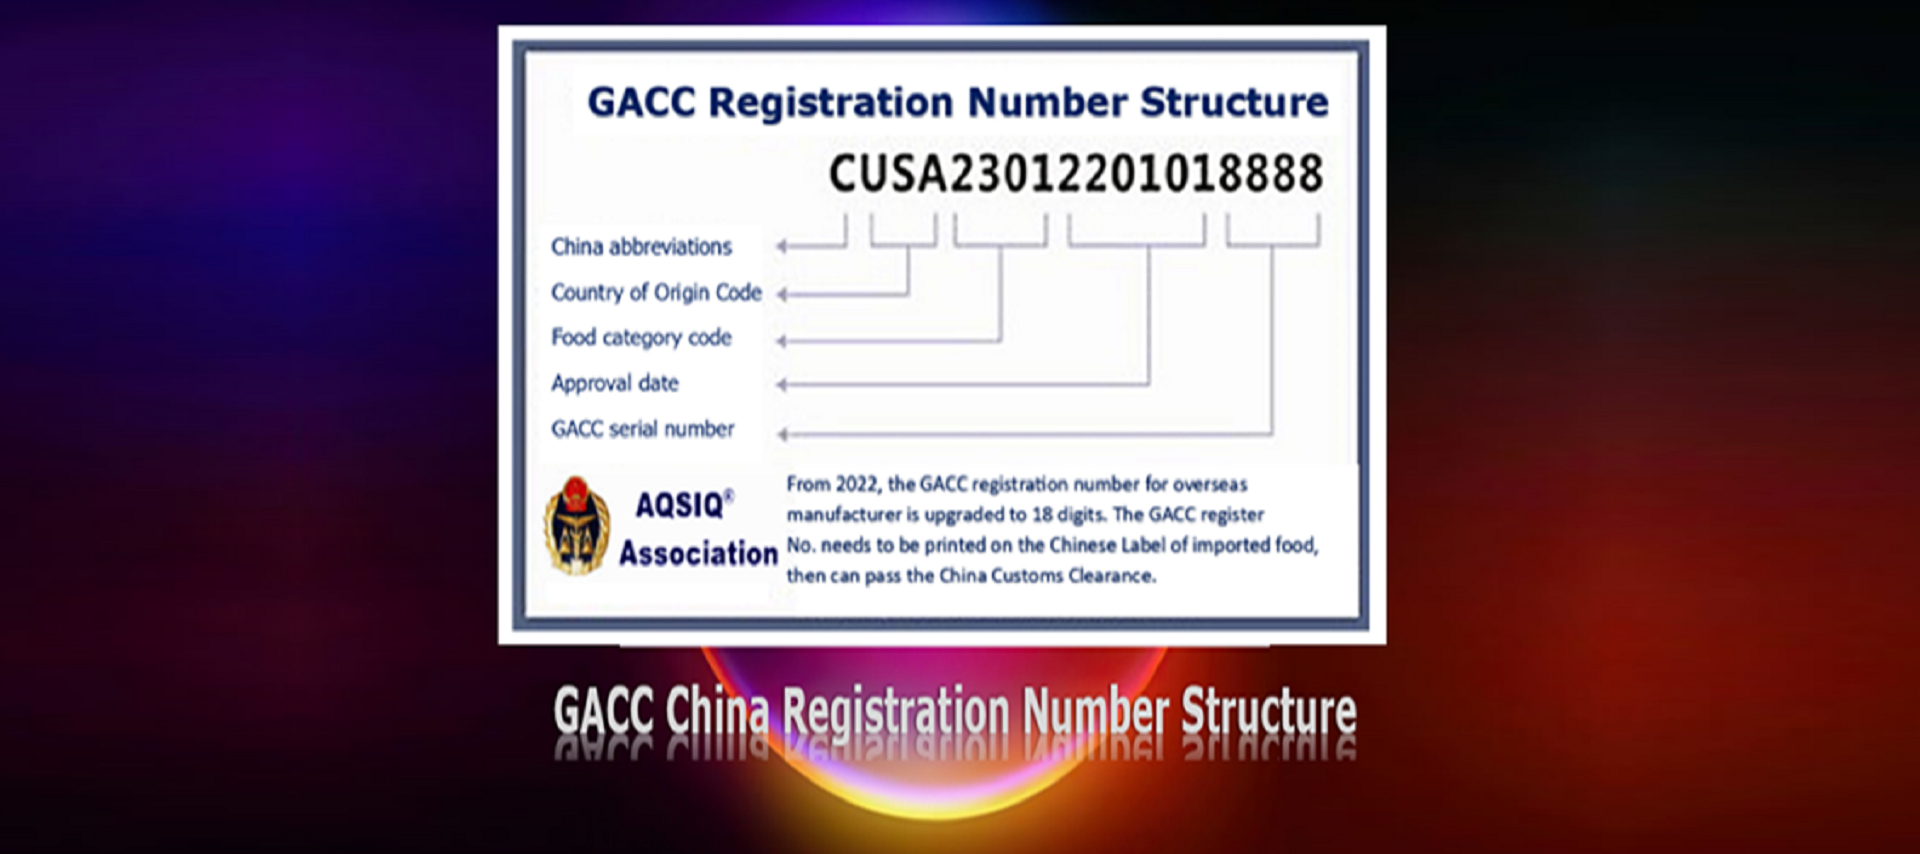 Explanation of 18 digits registration number for imported food label to pass China Customs Clearance